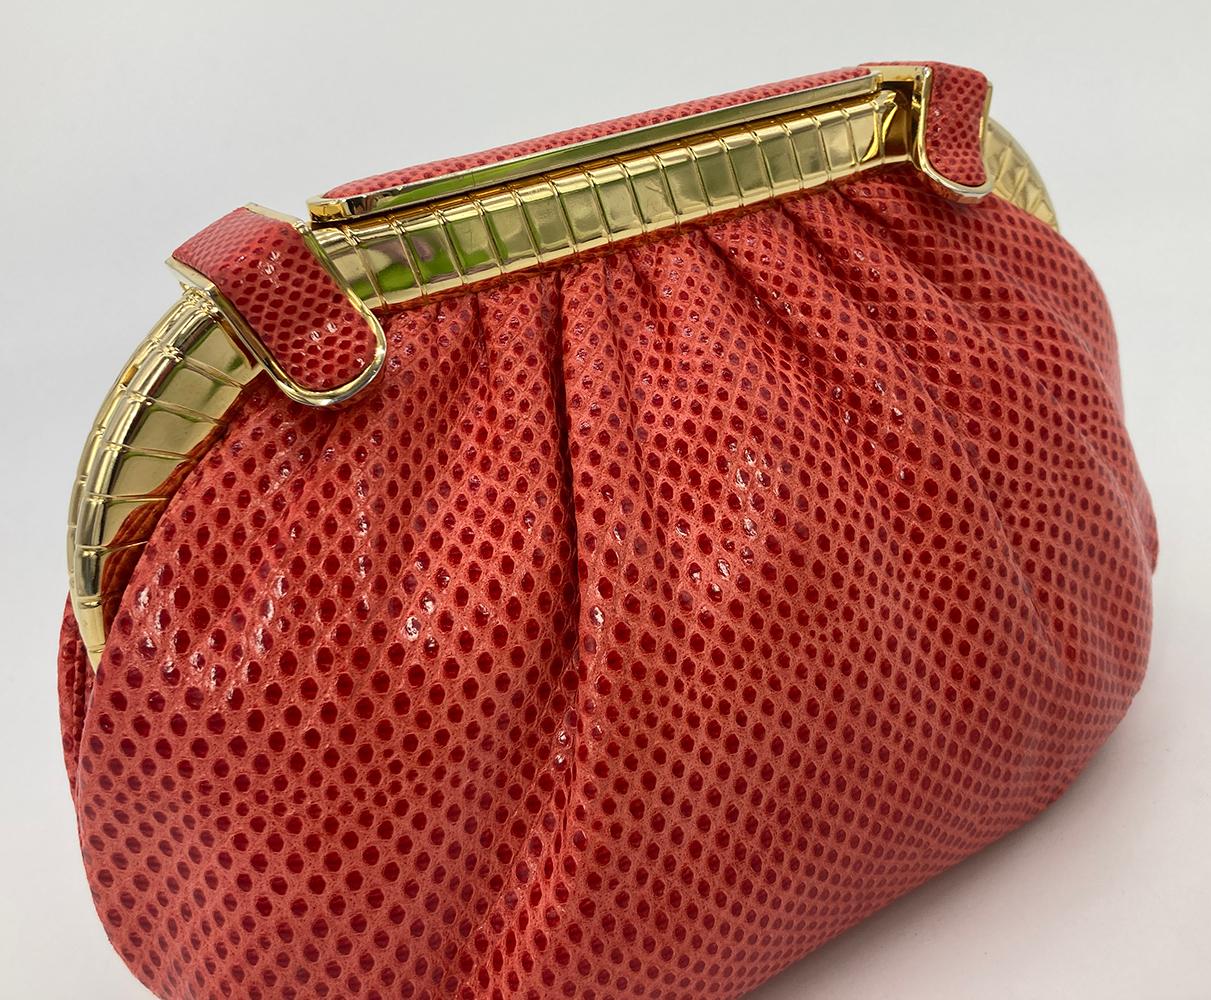 Judith Leiber Red Lizard Clutch In Excellent Condition For Sale In Philadelphia, PA